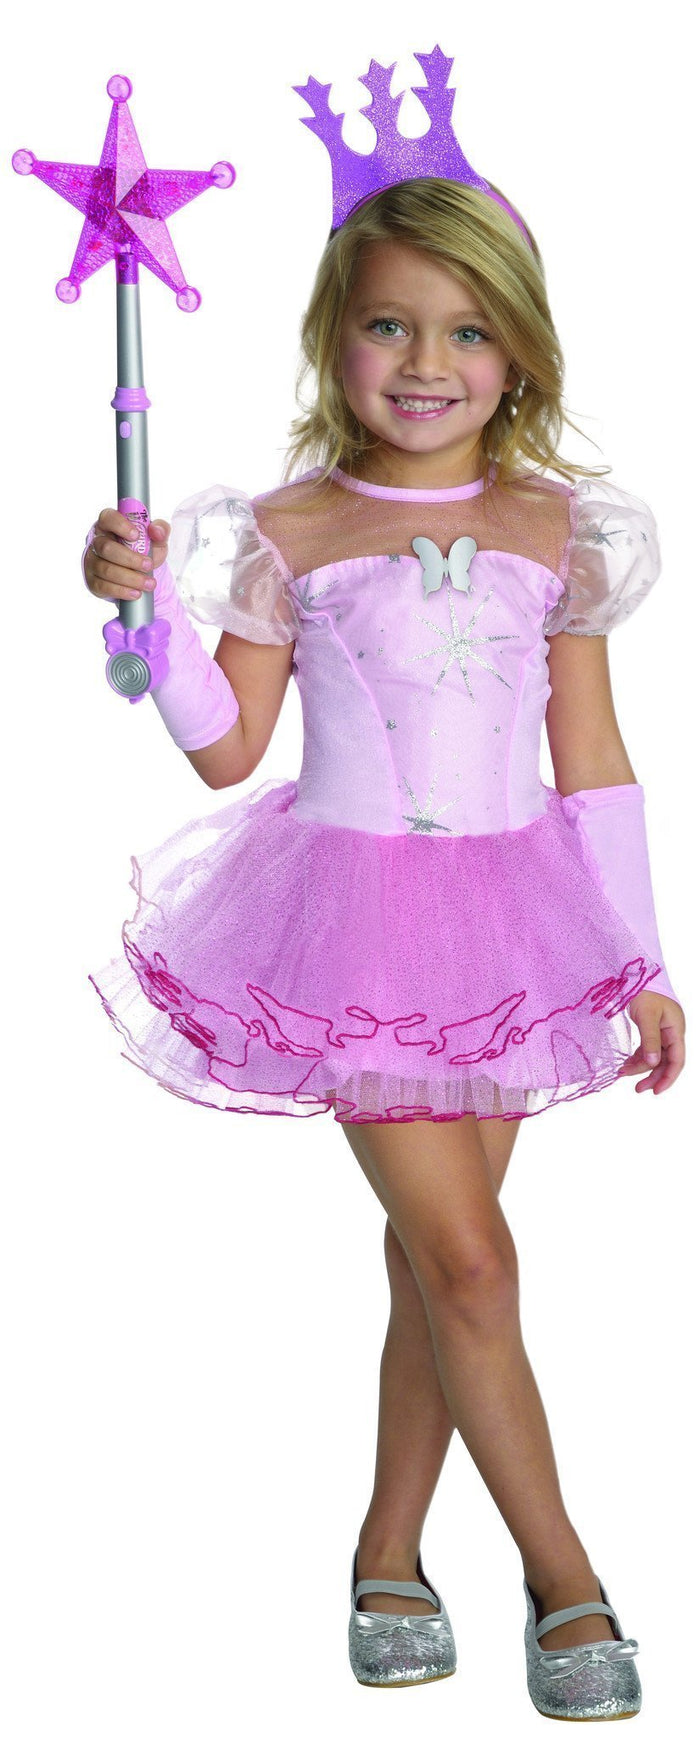 Glinda The Good Witch Tutu Costume for Kids - Warner Bros The Wizard of Oz